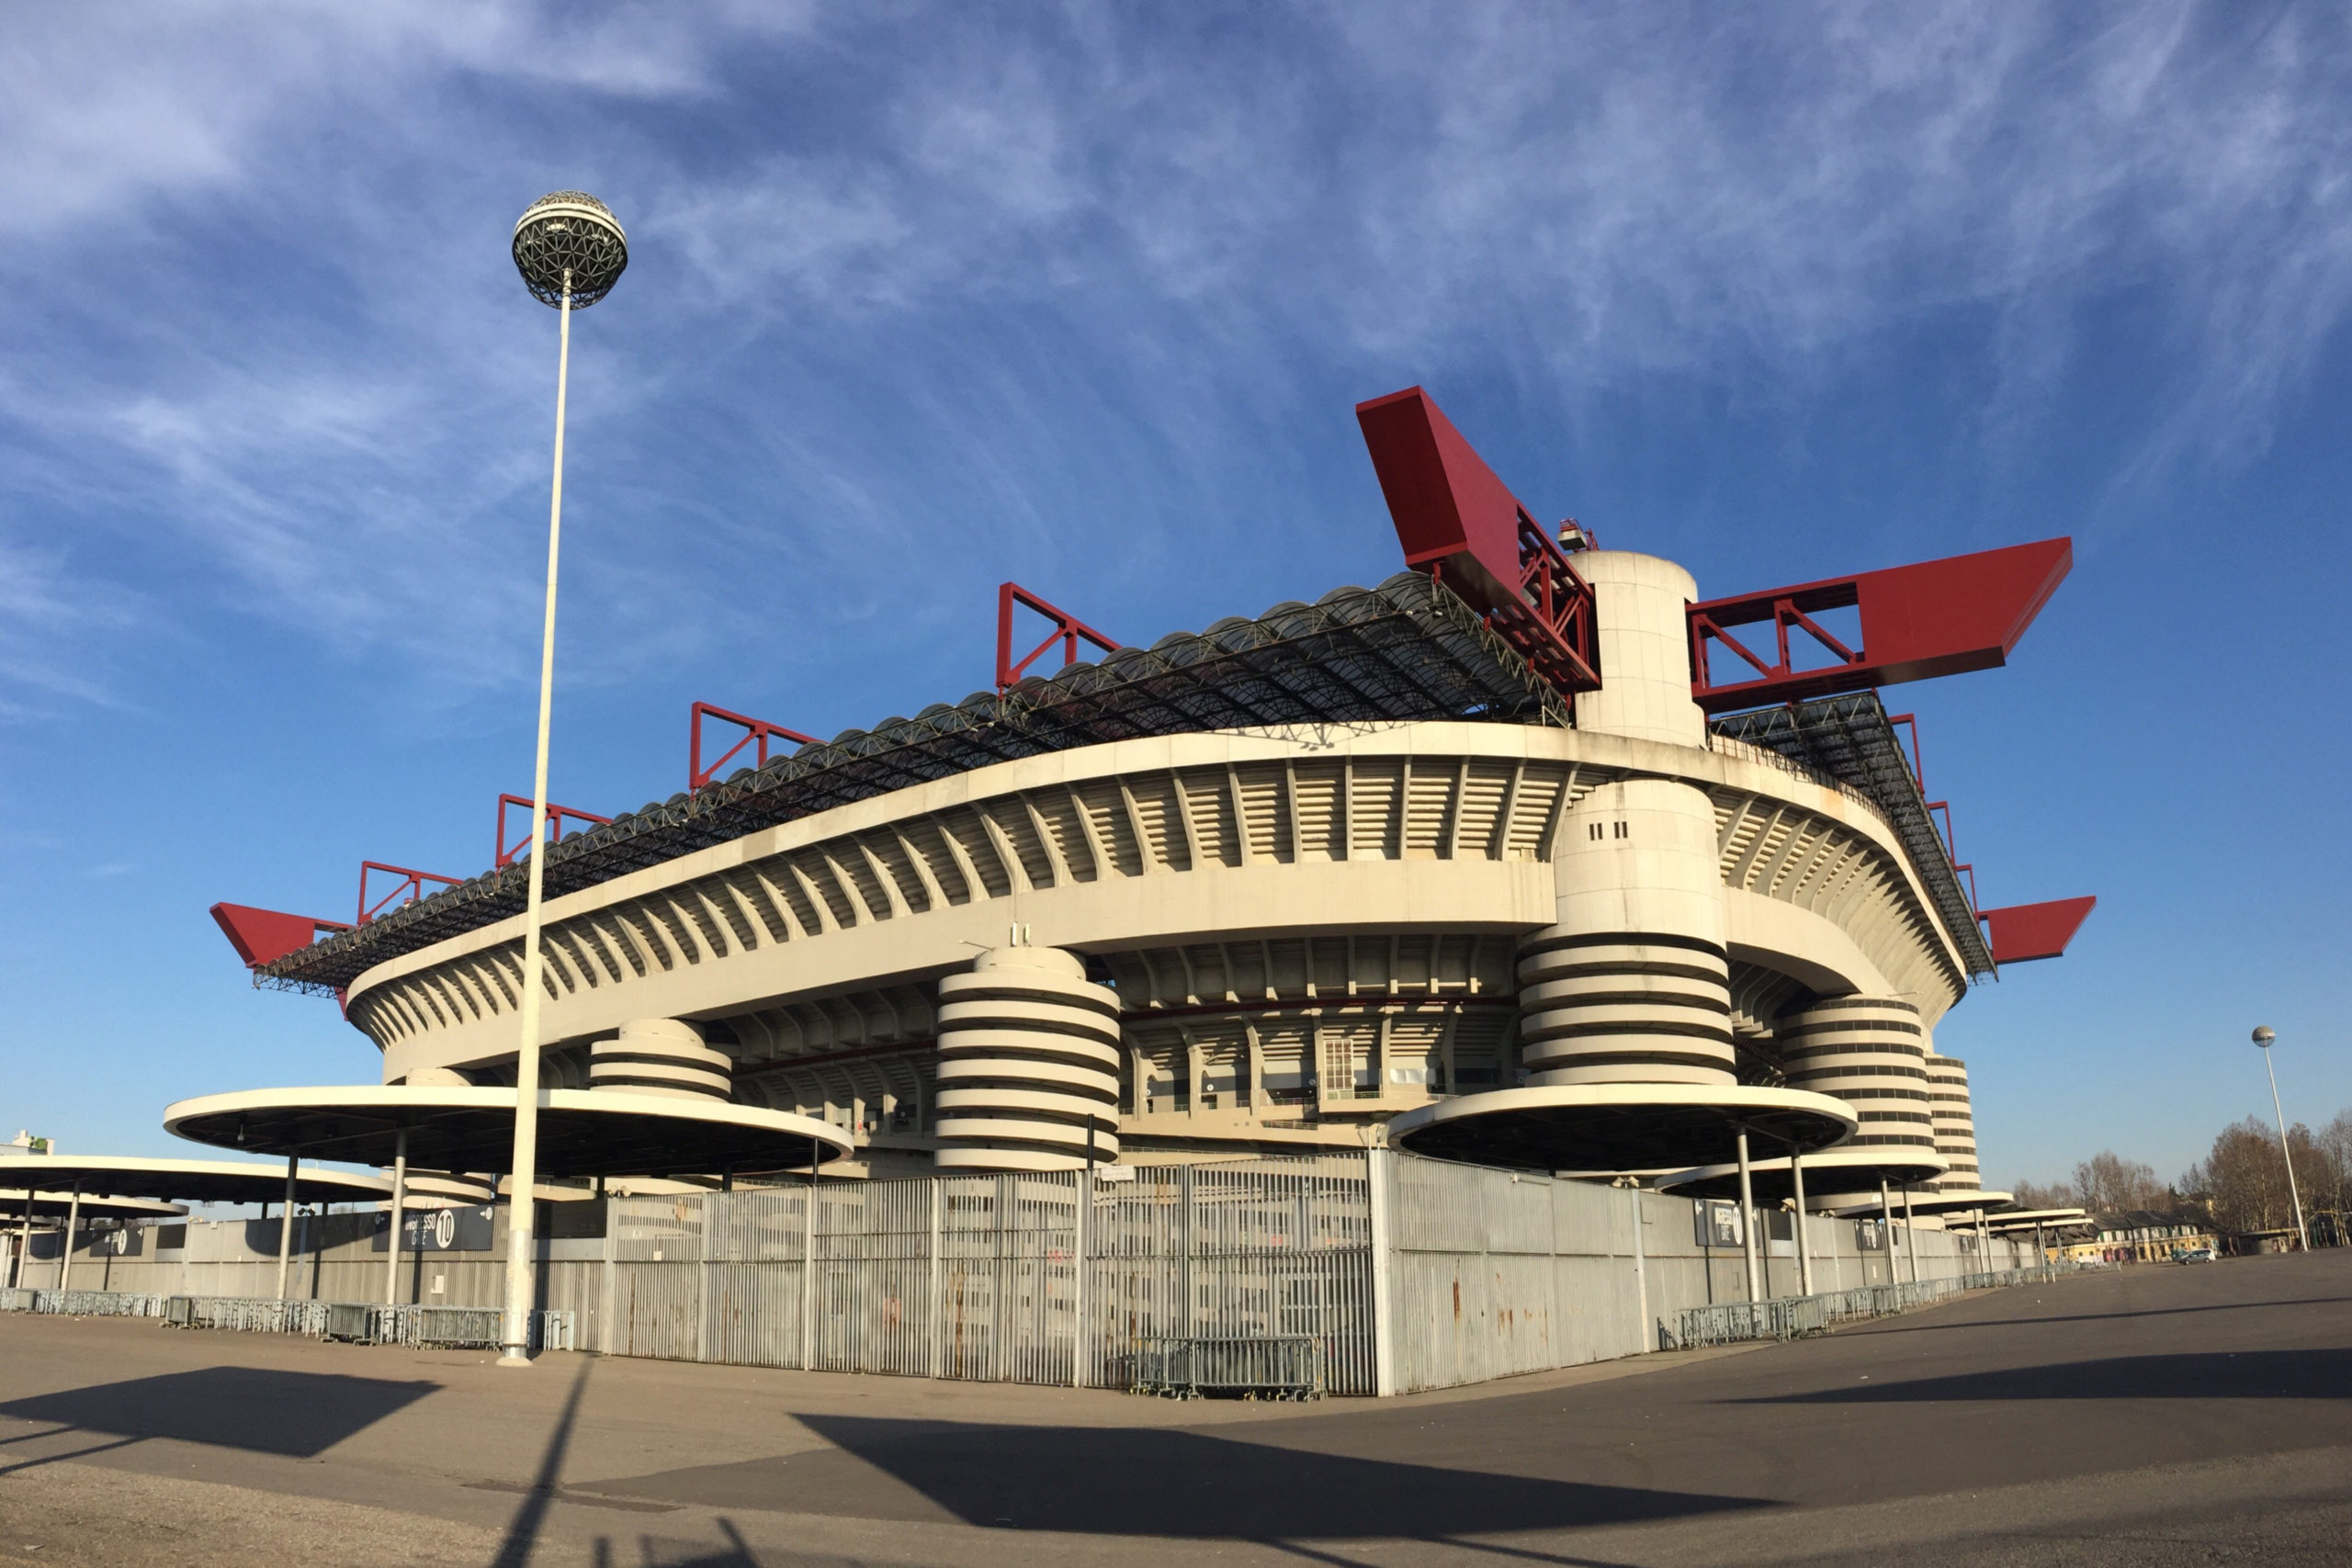 Inter are considering alternative plans in case the project to build a new stadium along with Milan in the San Siro area doesn’t come to fruition.